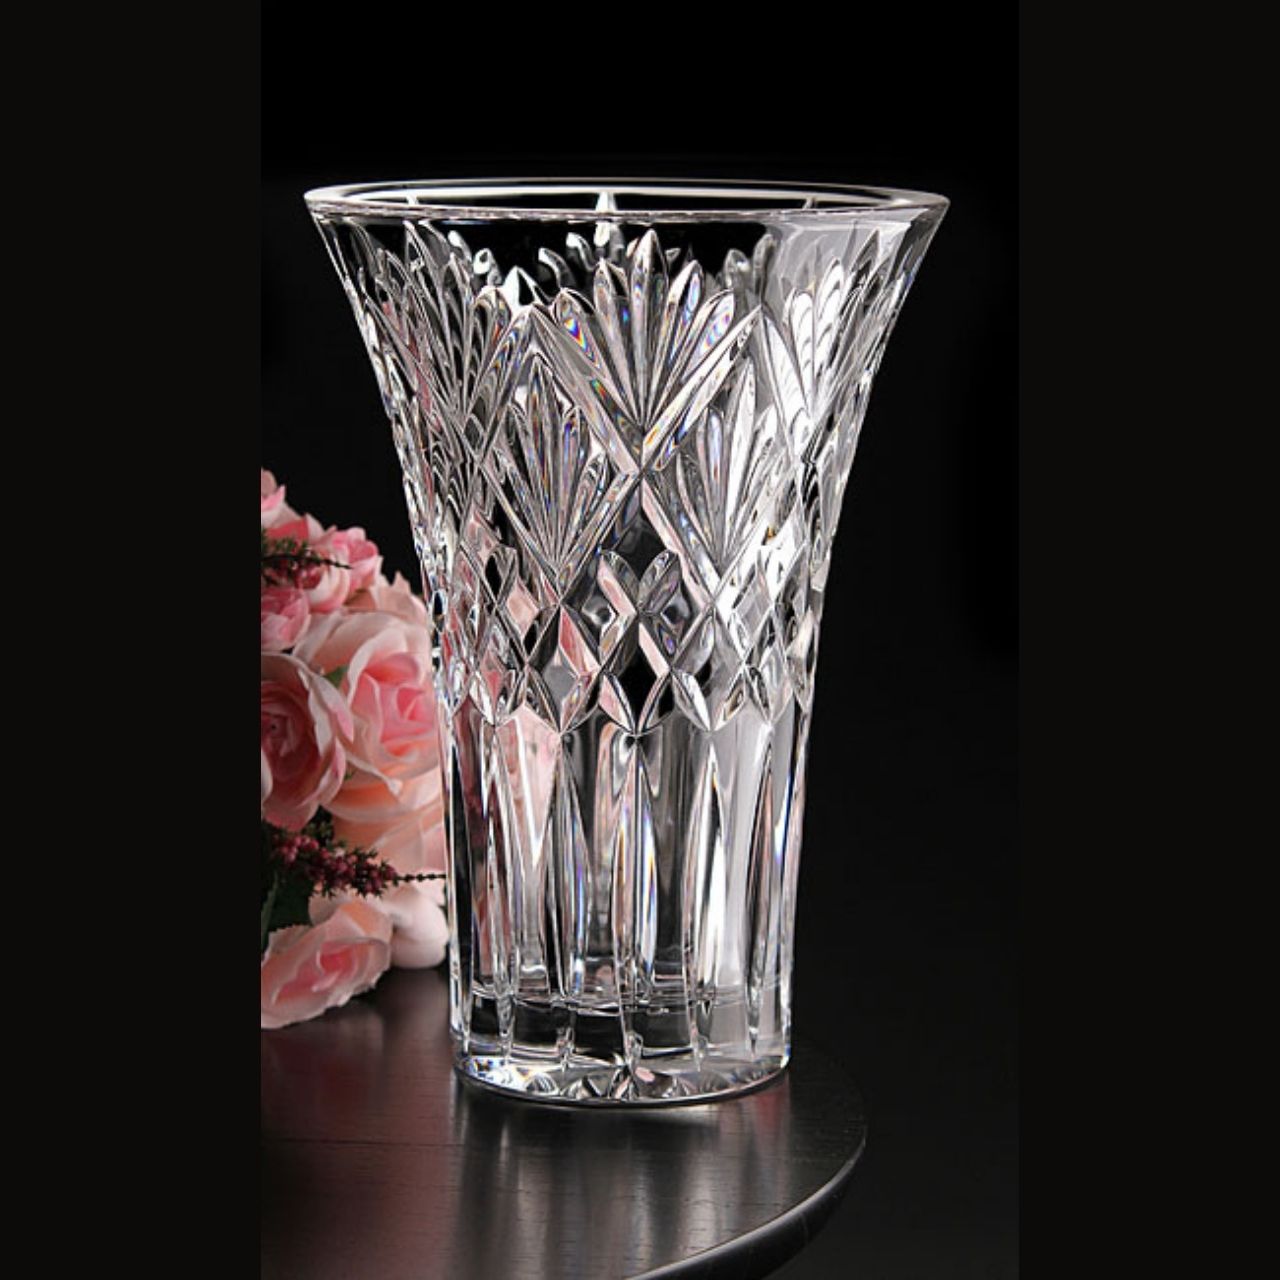 Waterford Crystal Cassidy 10'' Vase  The Cassidy pattern exemplifies a traditional Waterford Crystal cutting pattern, capturing a tremendous amount of sparkle. This beautiful 10 inch vase boasts an updated shape bringing a luxurious, fresh perspective to your home décor and entertaining.